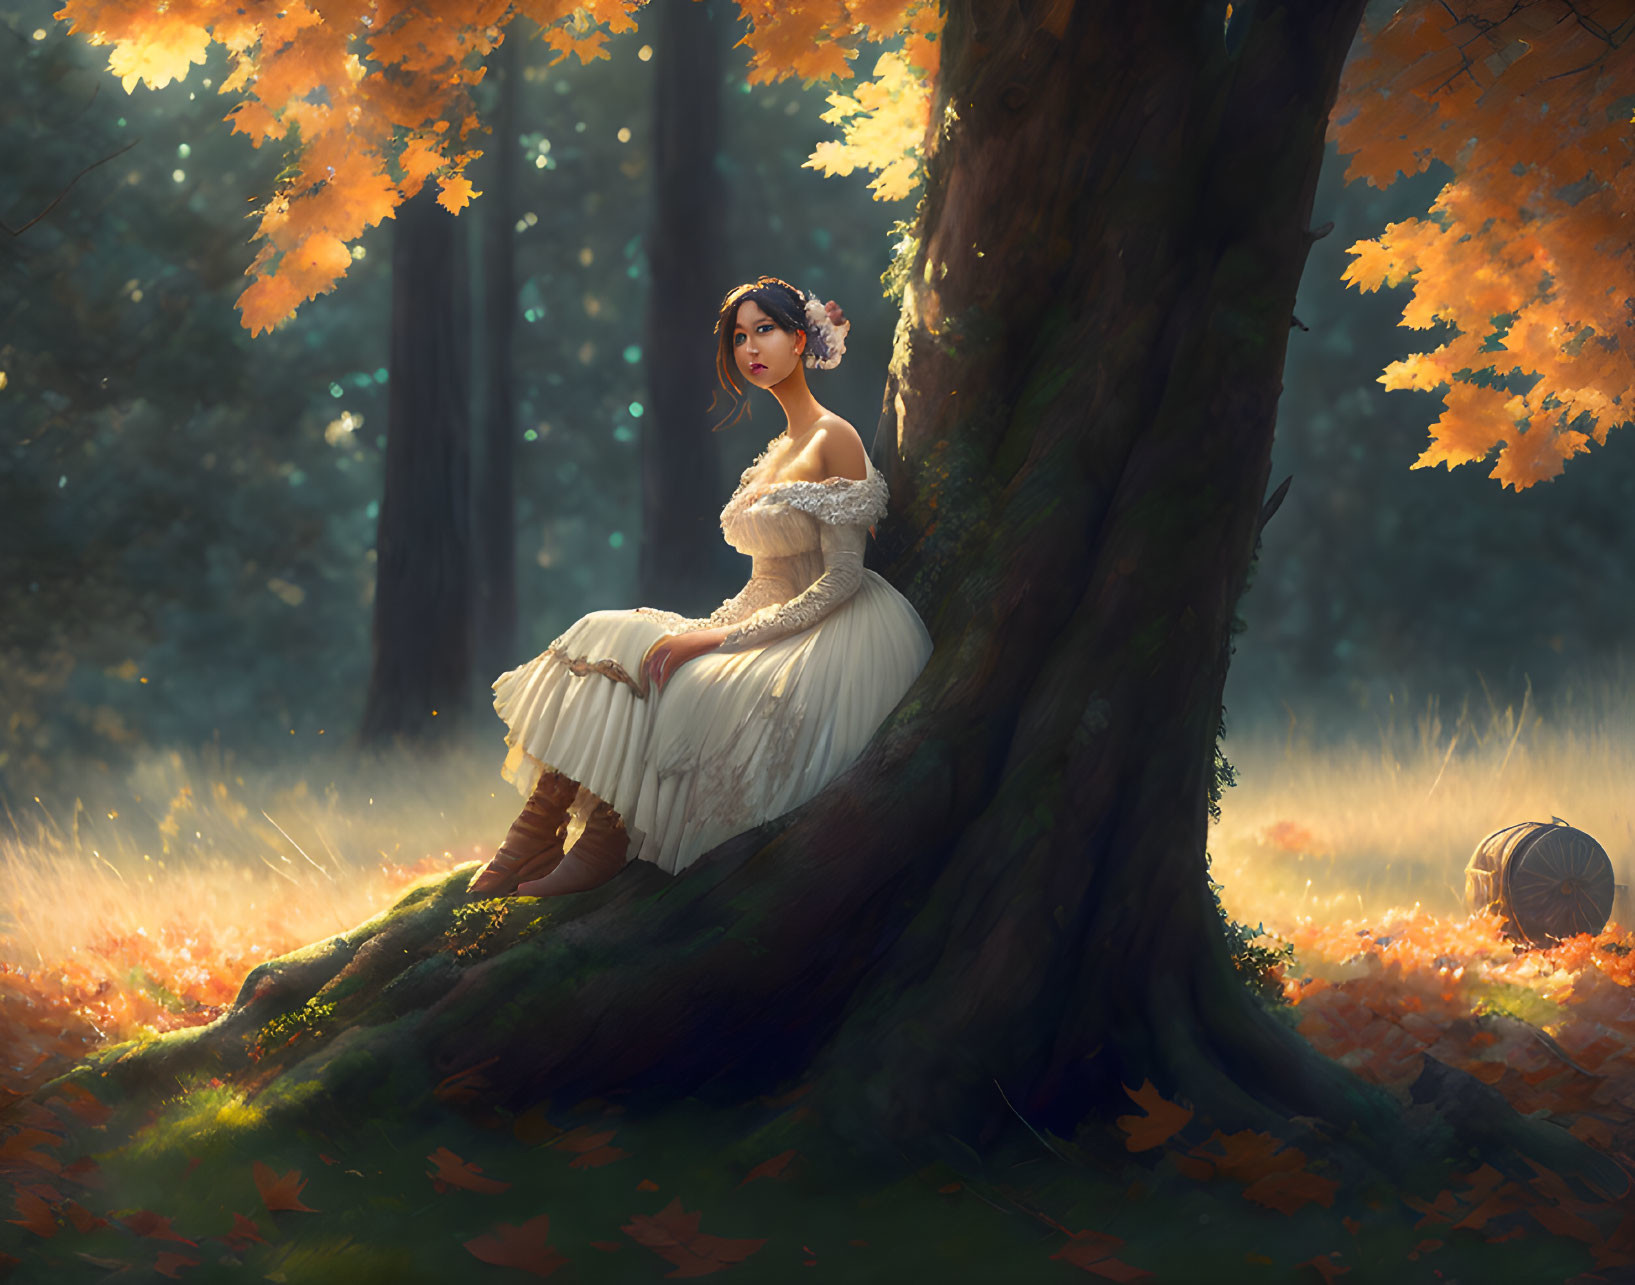 Woman in vintage white dress sitting among autumn leaves under tree canopy